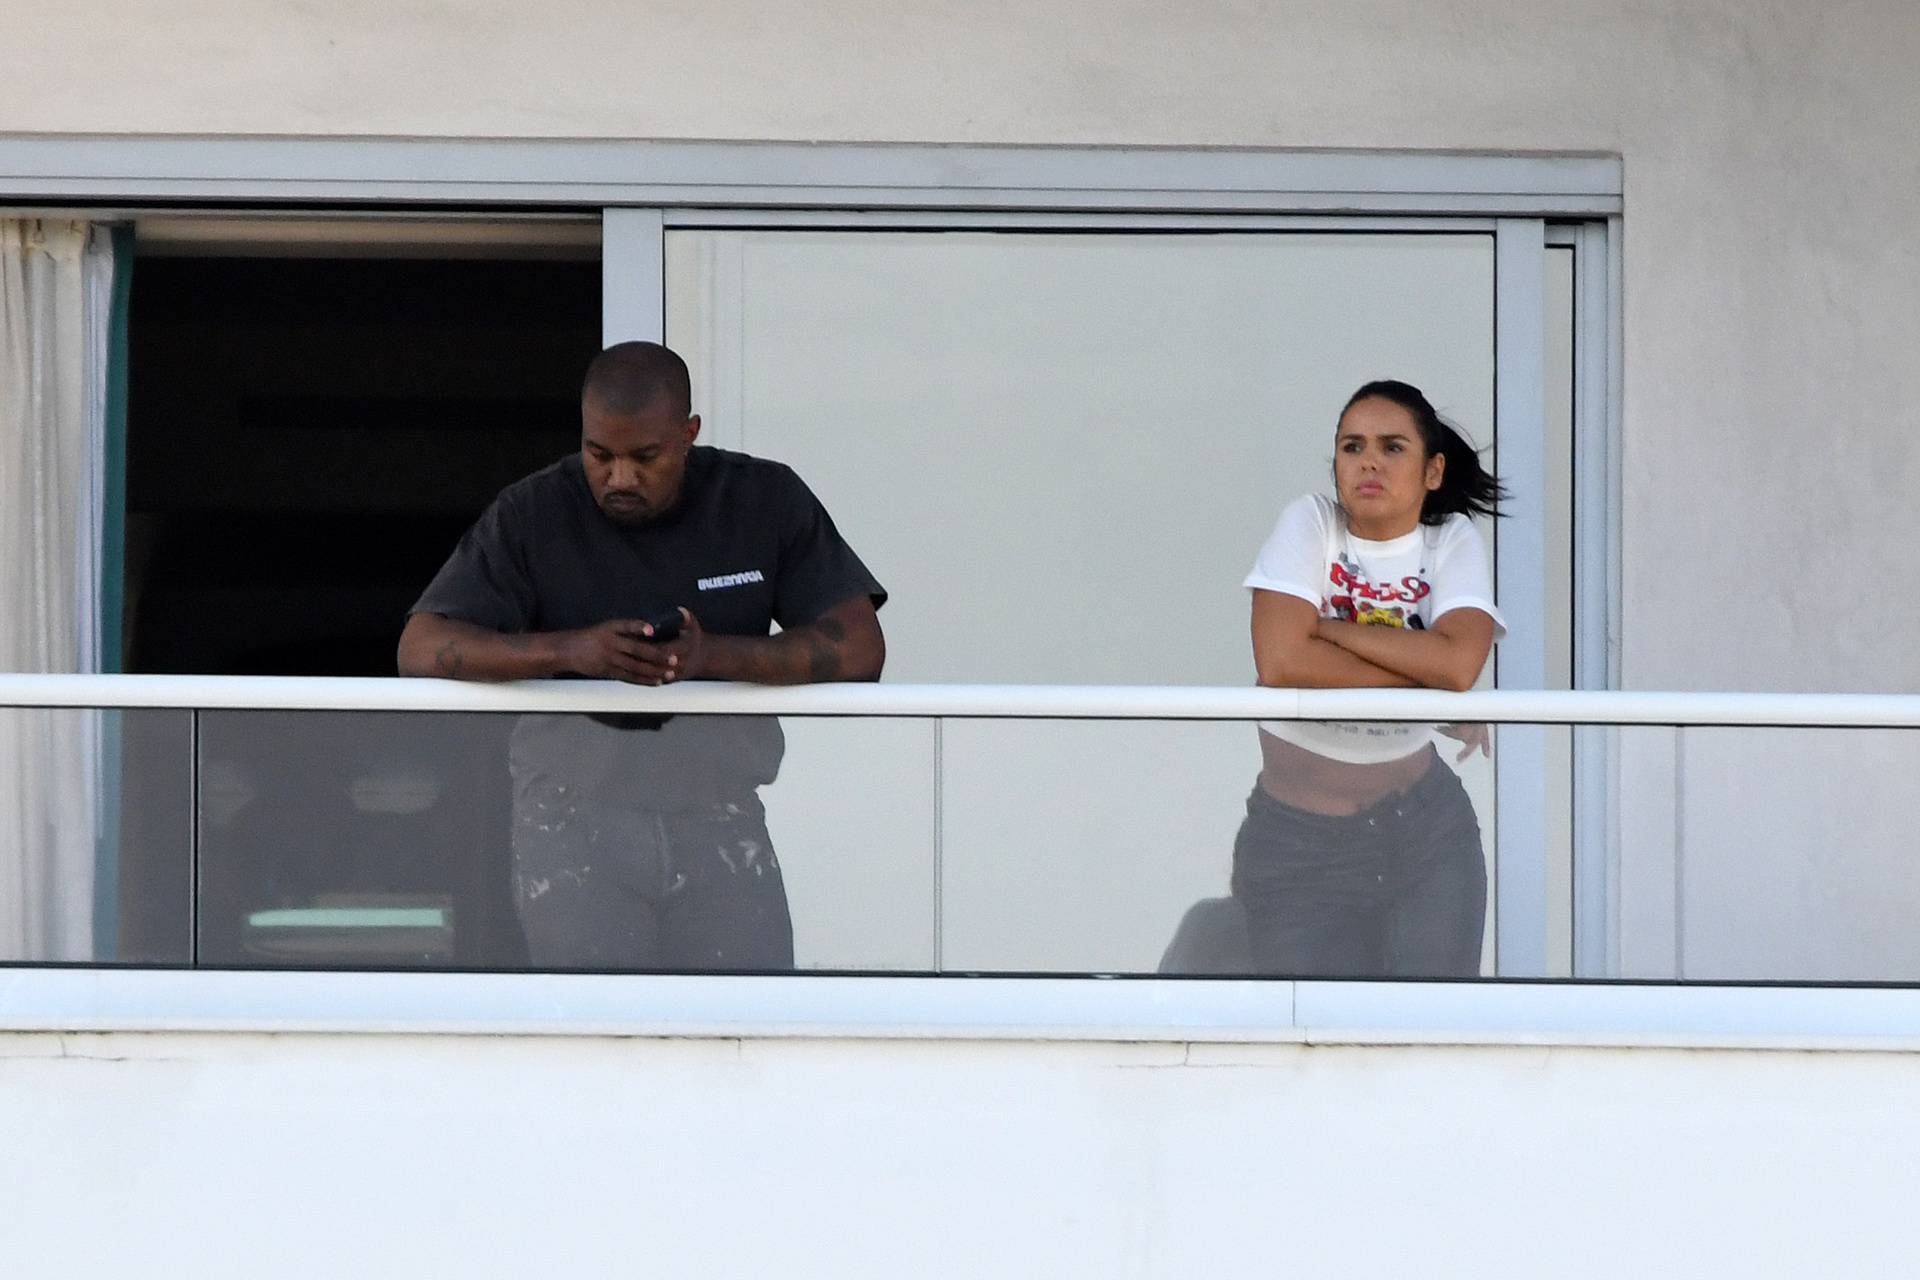 PREMIUM EXCLUSIVE:  A scantily-clad girl emerges from Kanye Wests hotel room as the rapper enjoys a relaxing New Years break in Miami.